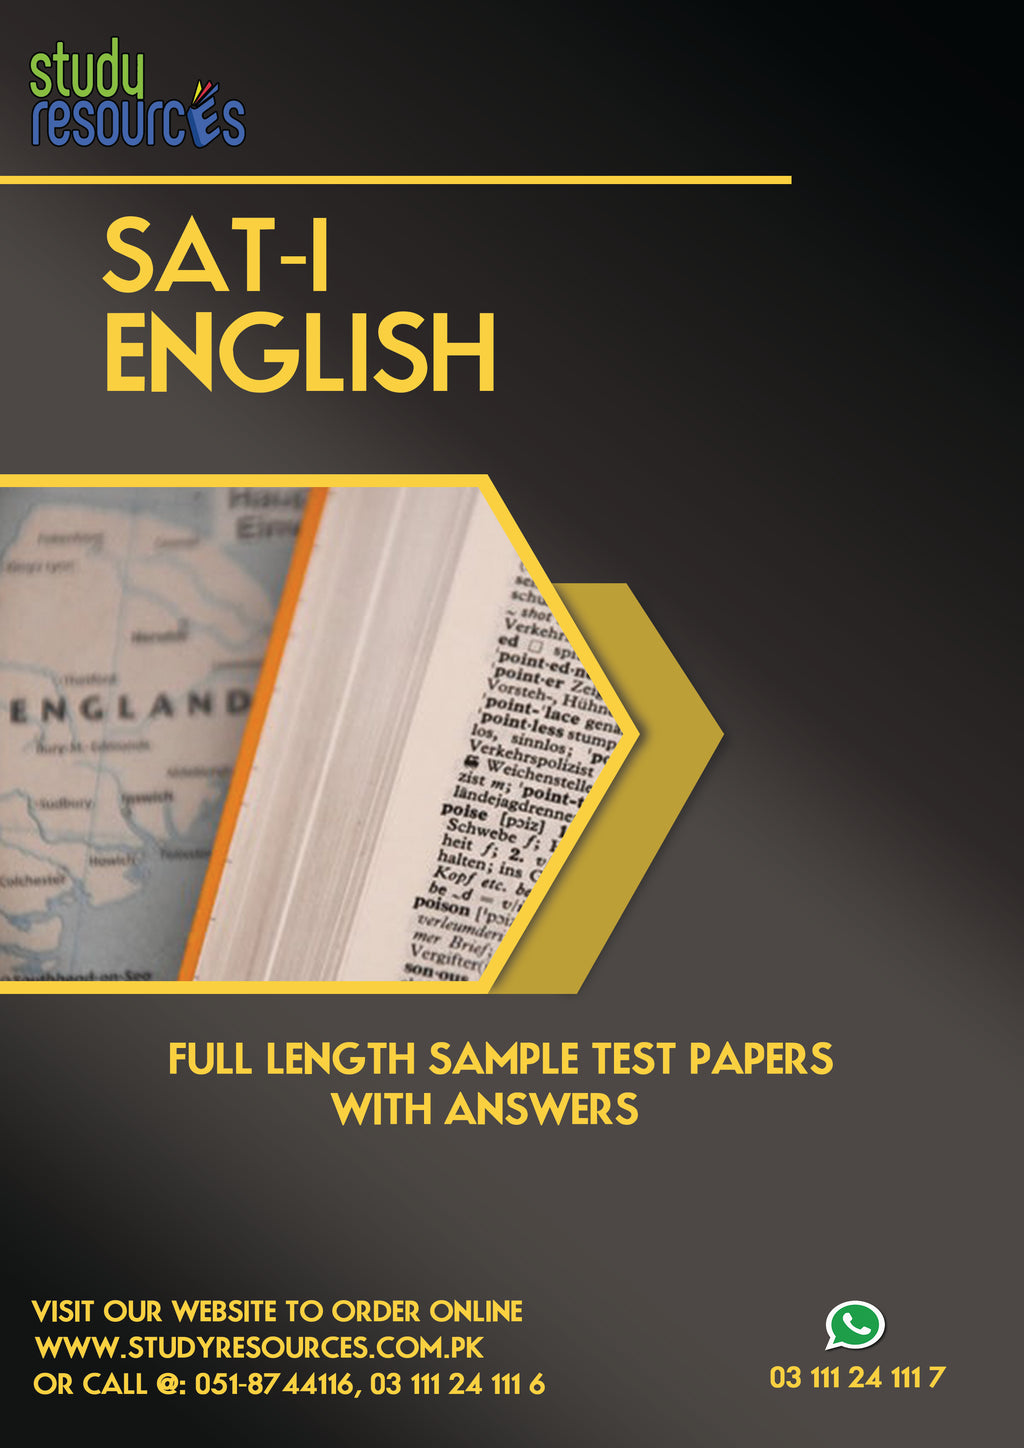 SAT-I English Full Length Sample Test Papers